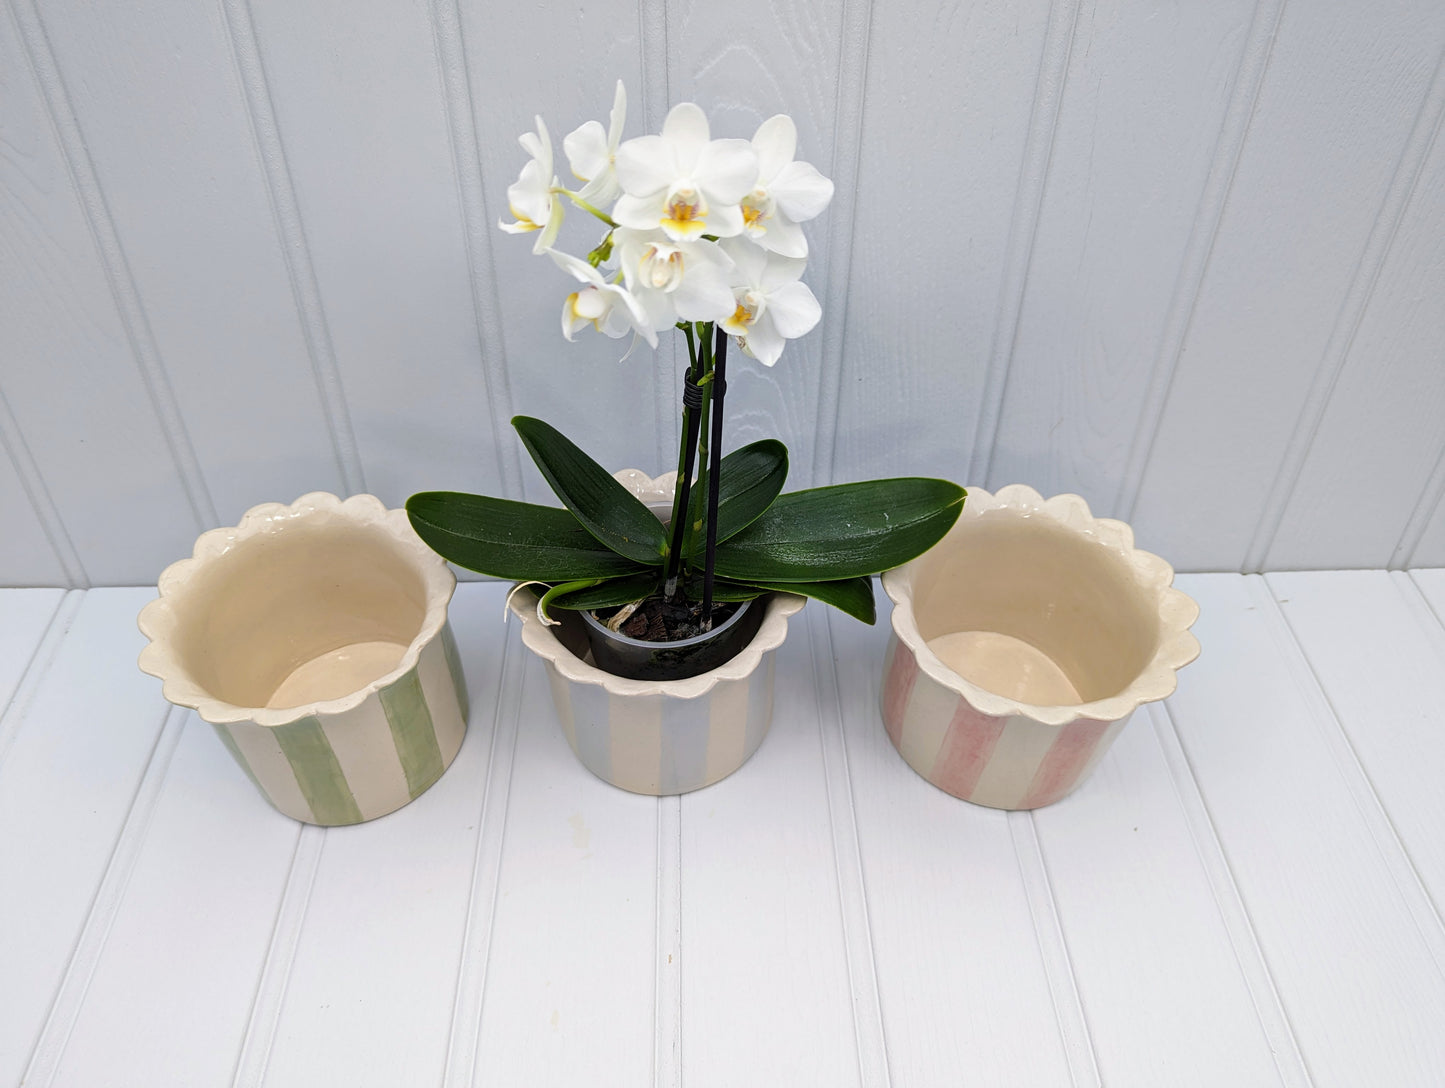 3 Small, Handmade, Ceramic, Stoneware Orchid / Houseplant planters with scalloped top and stripes. One Sage, one Baby blue and one pink.